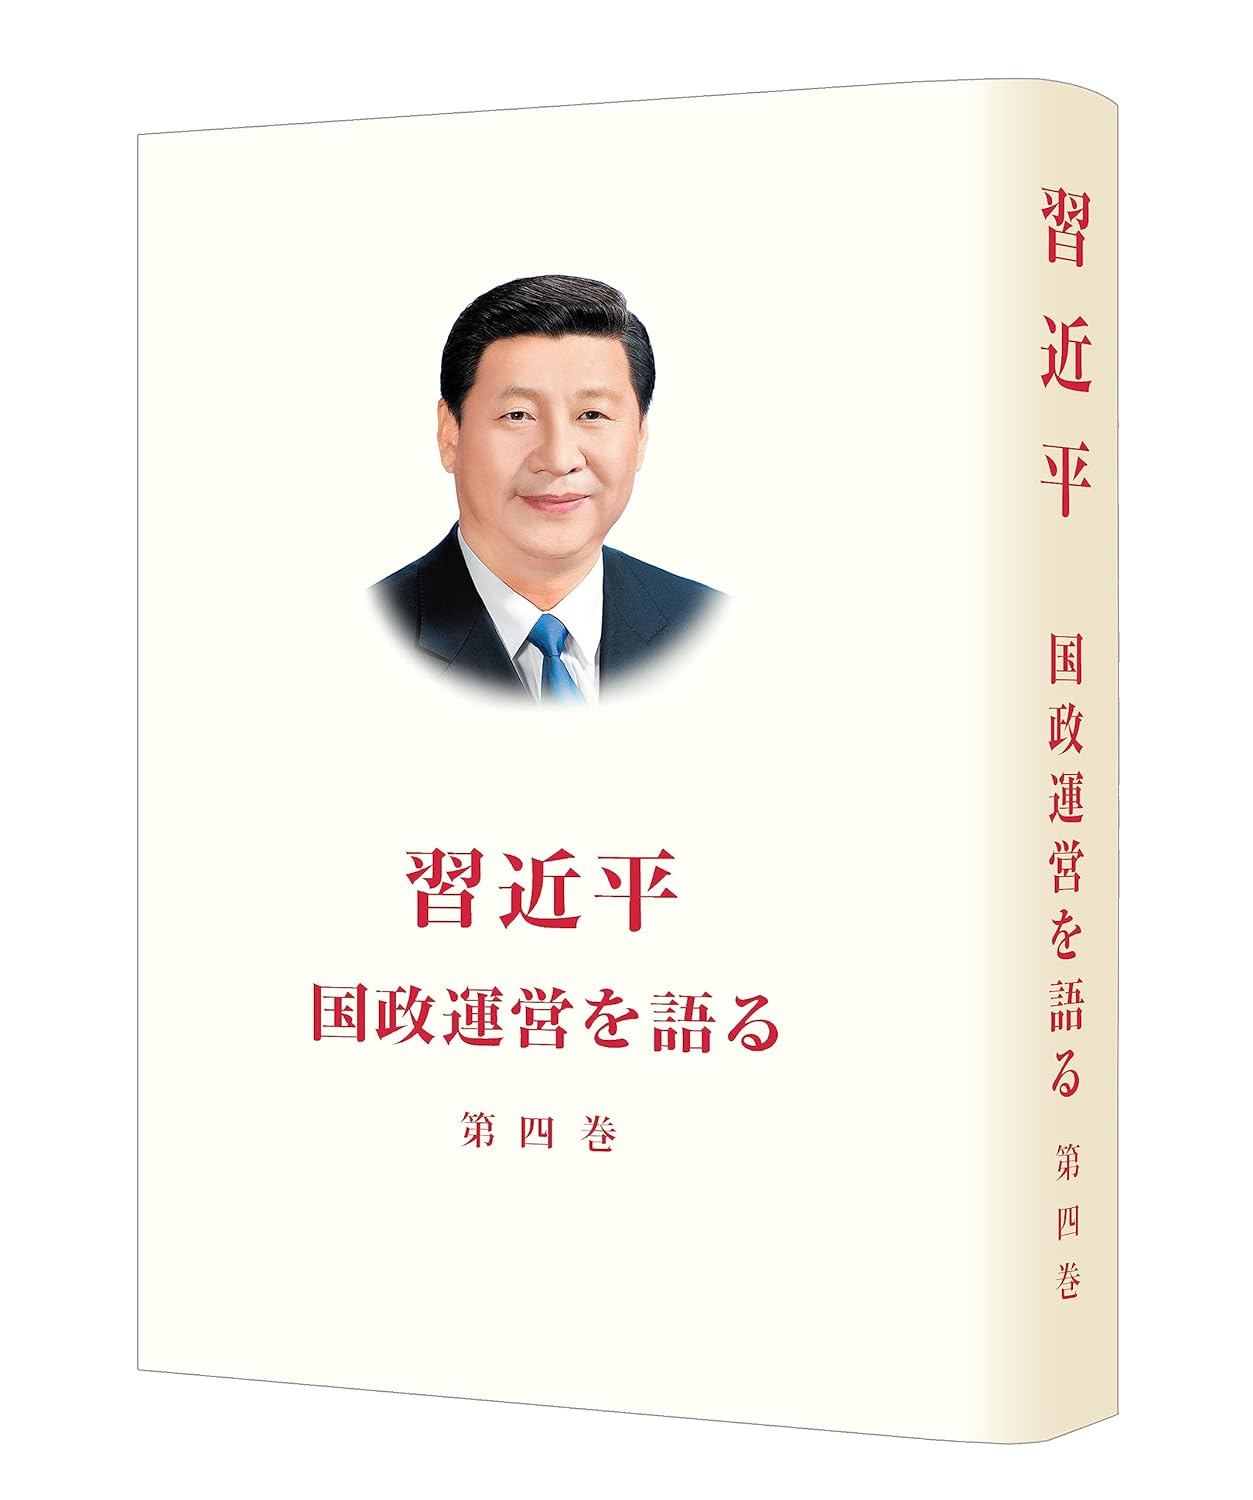 Xi Jinping: The Governance of China Vol. 4 (Japanese) - Paperback